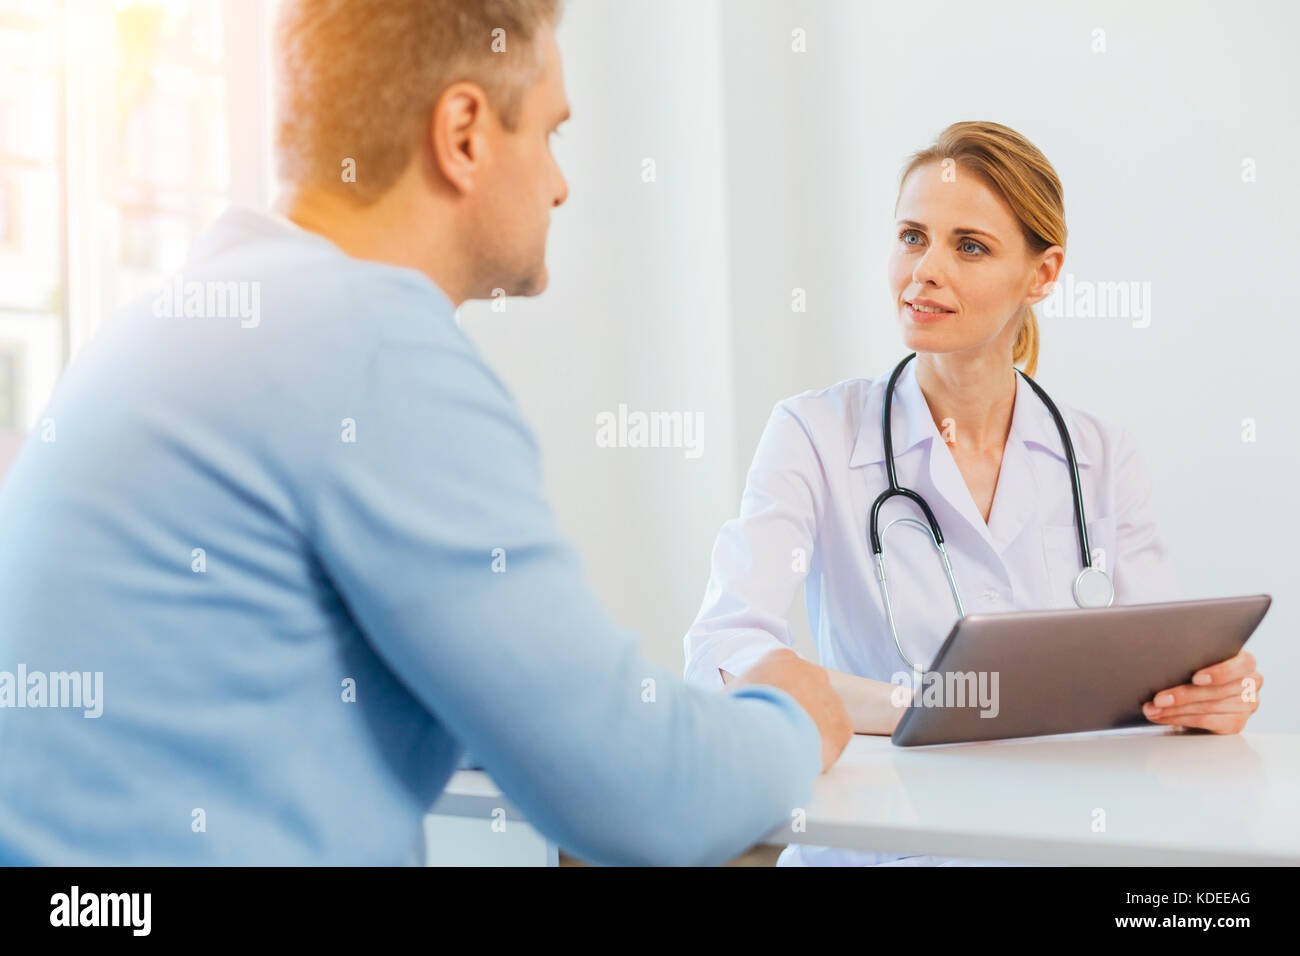 Mindful female doctor listening to patient Stock Photo